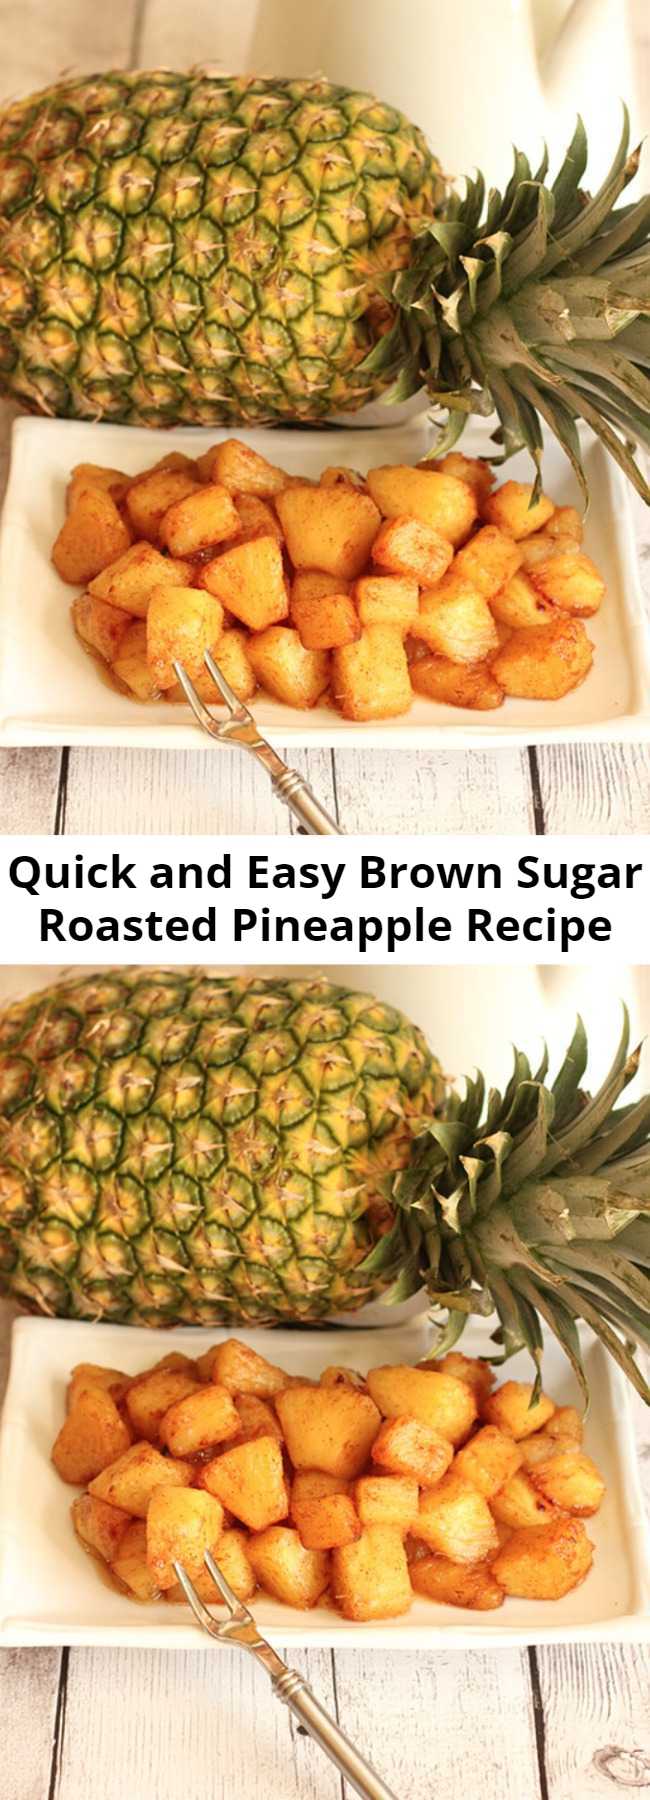 Quick and Easy Brown Sugar Roasted Pineapple Recipe - We love this roasted pineapple with brown sugar, butter and a hint of cinnamon. It is a quick side dish that is as good as grilled pineapple any day! Roasting concentrates the sweet pineapple flavor for delicious results.